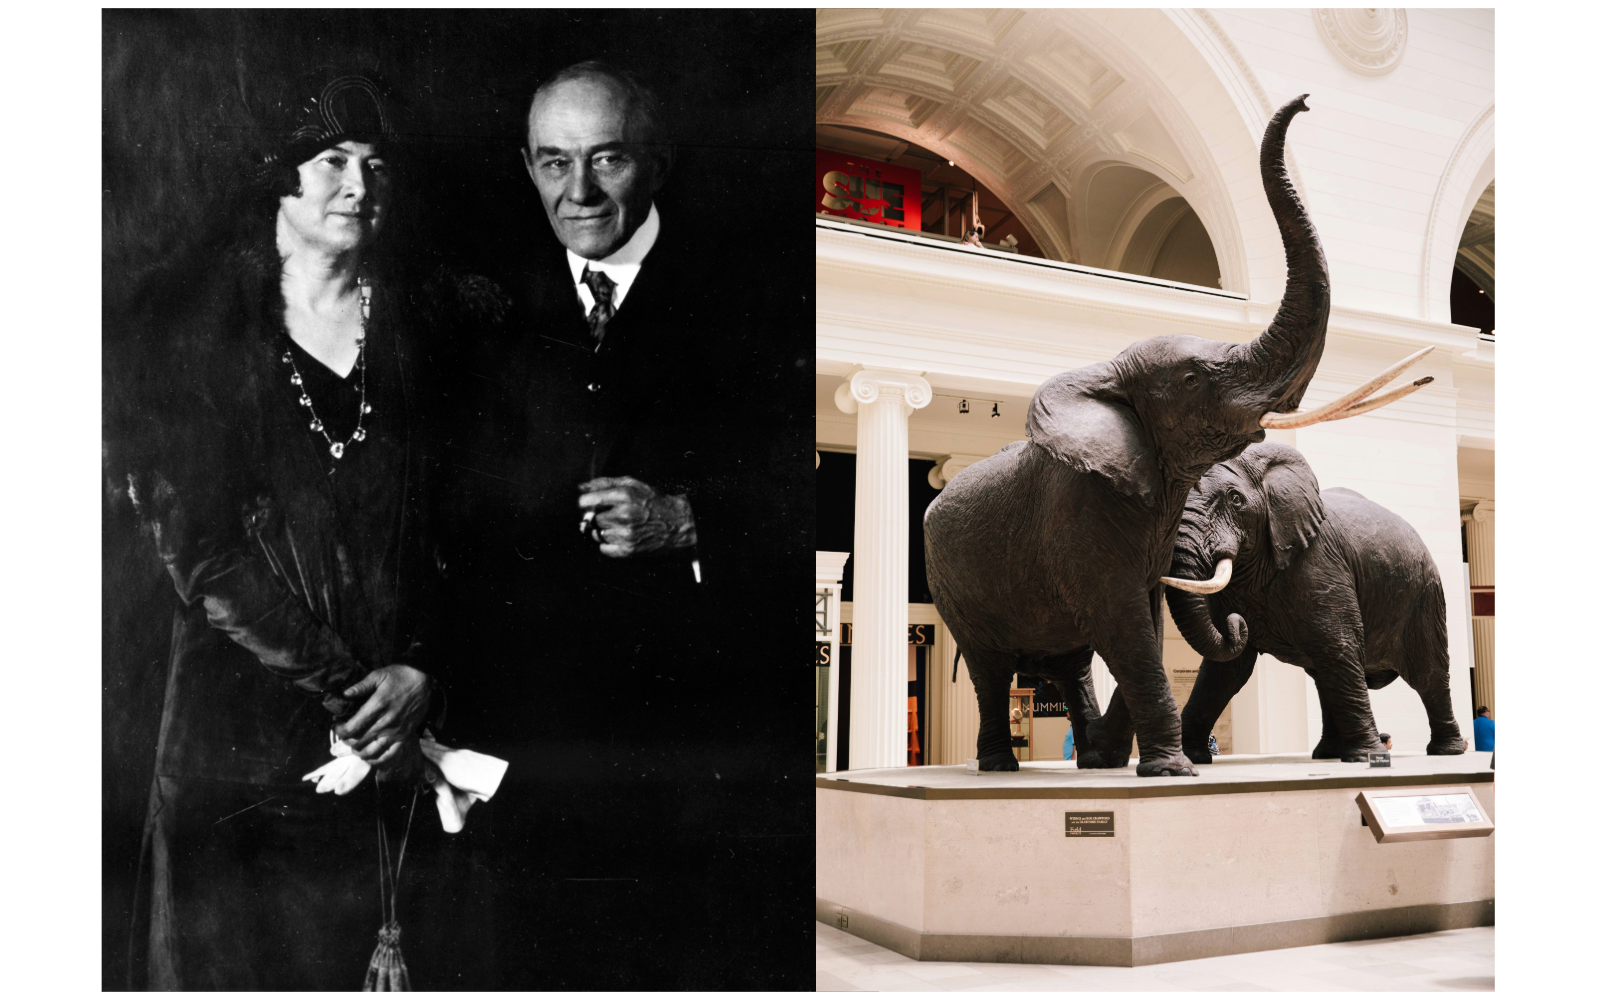 Right, Delia and Carl Akeley; left, two taxidermied elephants